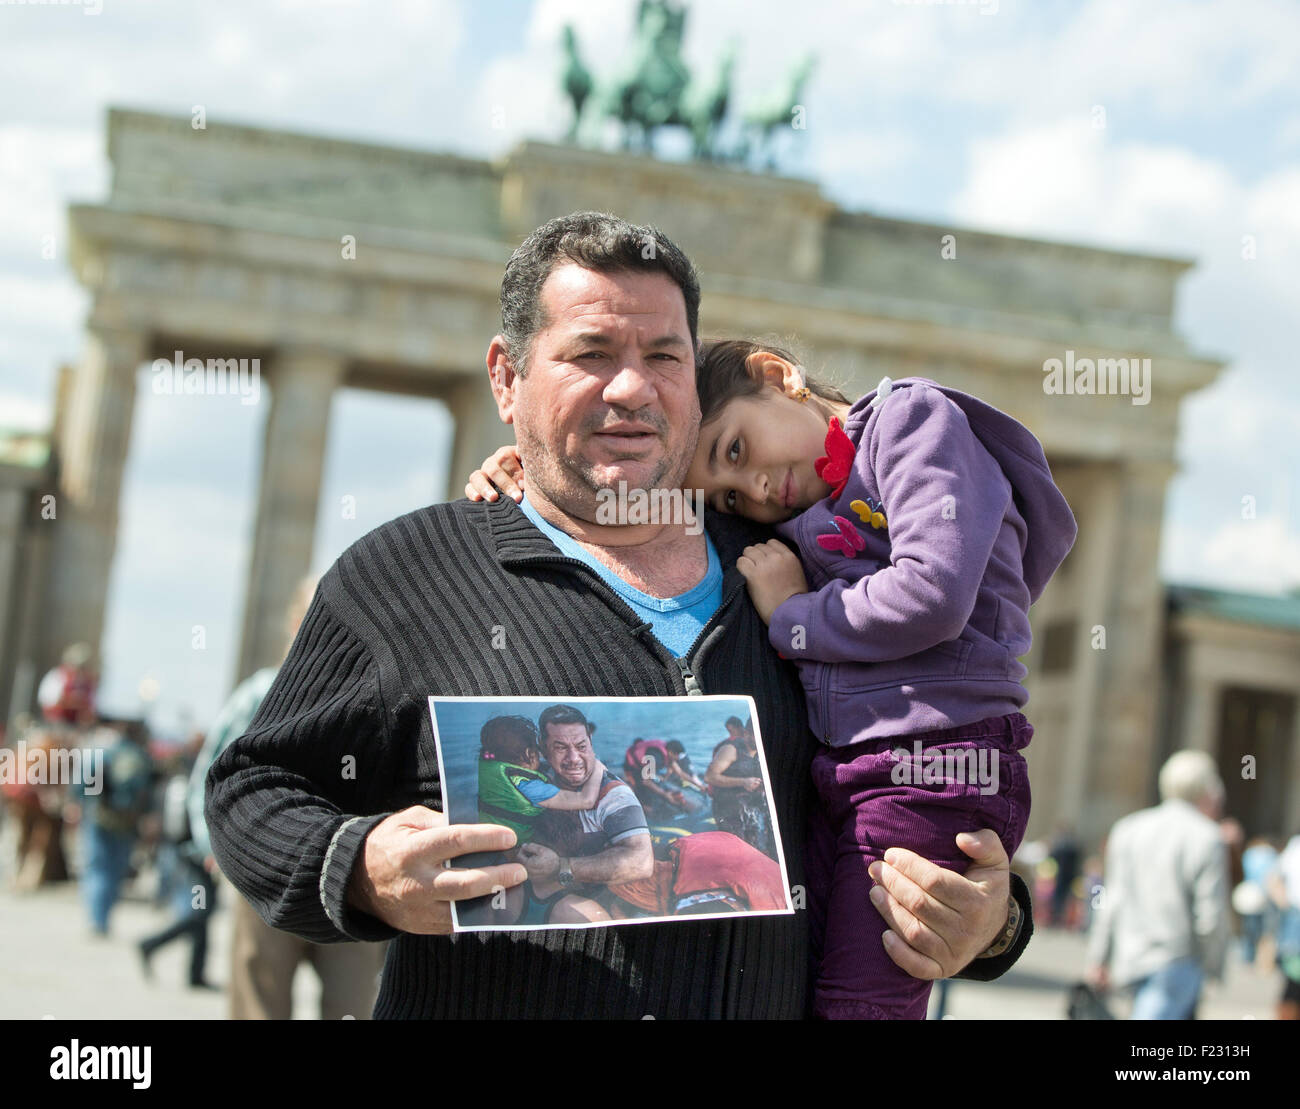 Berlin, Germany. 10th Sep, 2015. Iraqi refugee Laith Majid Al-Amirij and his 7-year-old daughter Noor pose with a photo showing them during their crossing on the Greek island of Kos, in front of the BRandenburg gate in Berlin, Germany, 10 September 2015. The photo was seen around the world. First published in mid-August in the New York Times, it was shared thousands of times on social media. The family are now being housed in Berlin. PHOTO: JOERG CARSTENSEN/DPA/Alamy Live News Stock Photo